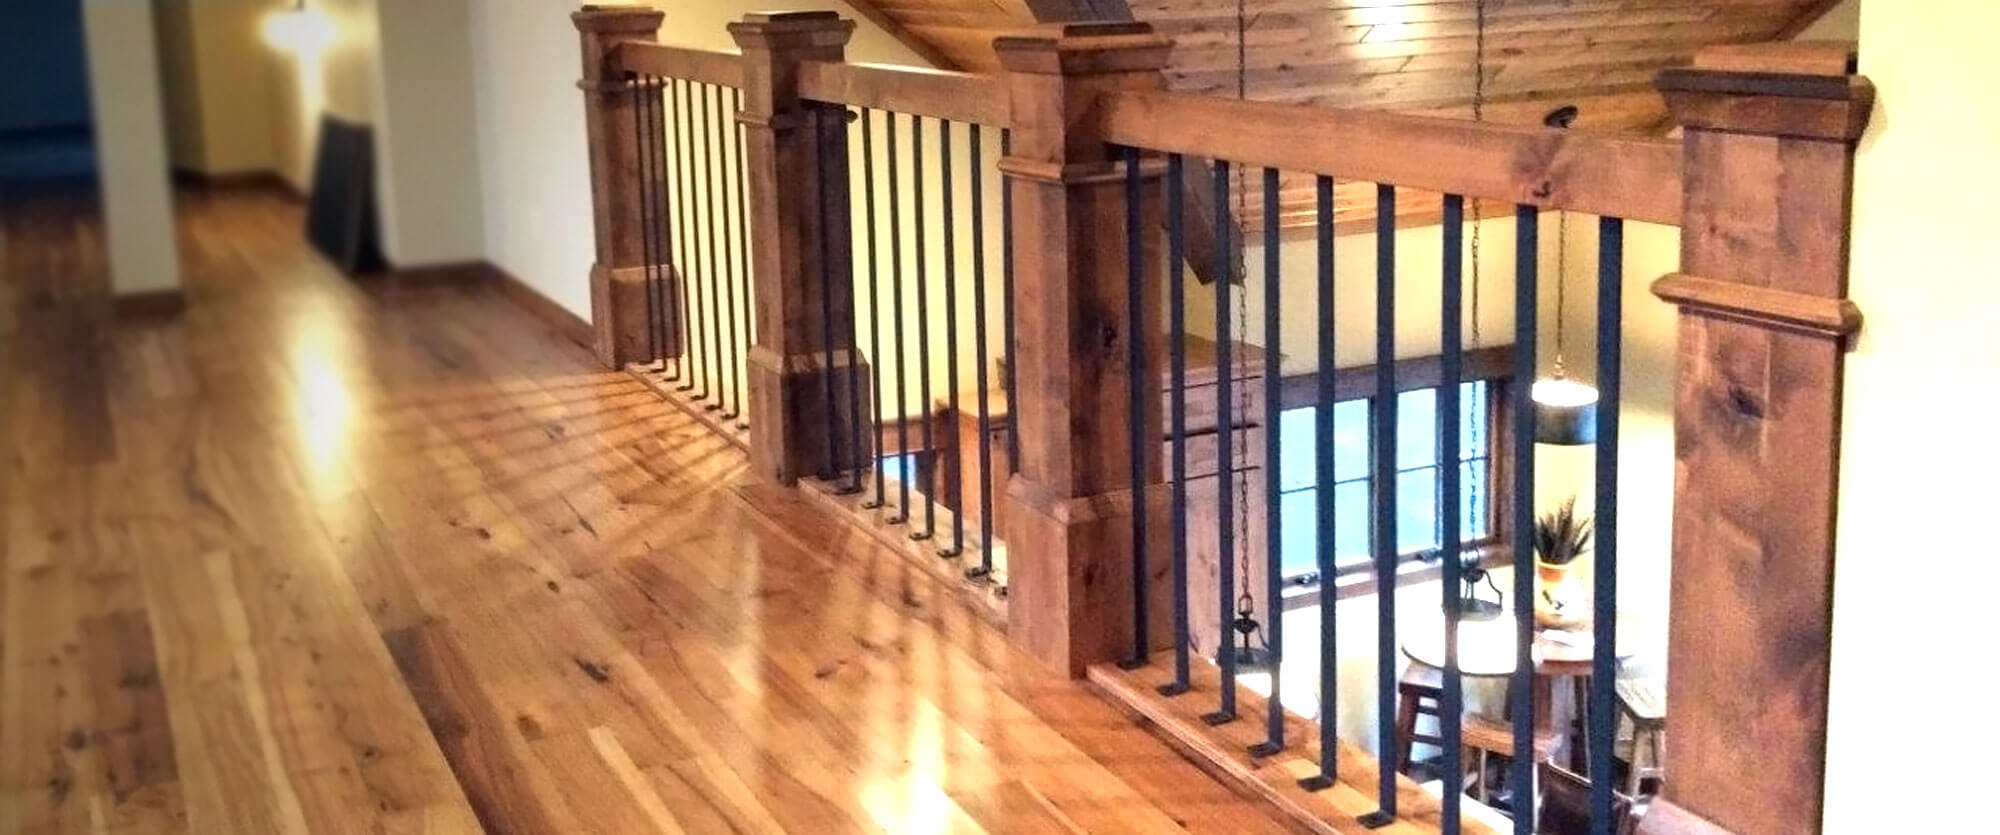 Custom solid wood stair railings; designed, built, and installed by finewood Structures of Browerville, MN